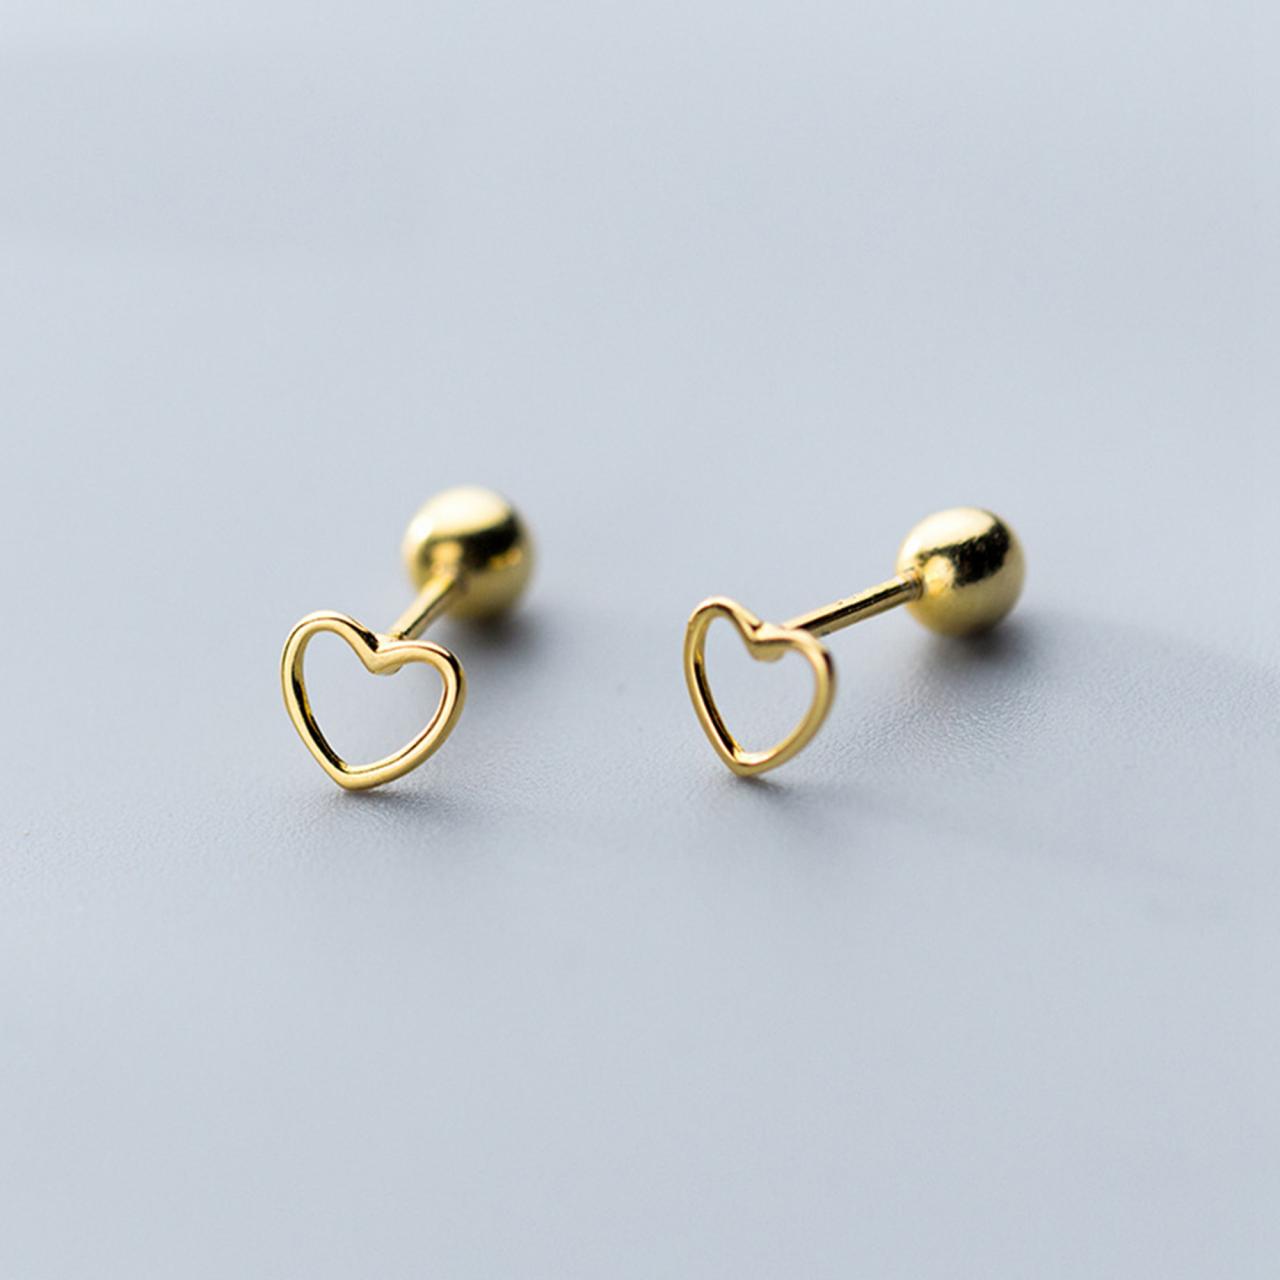 S925 Sterling Silver Hollow Heart Ear Stud With Ball End, Heart Earrings, Heart Ear Post, Heart Ear Stud